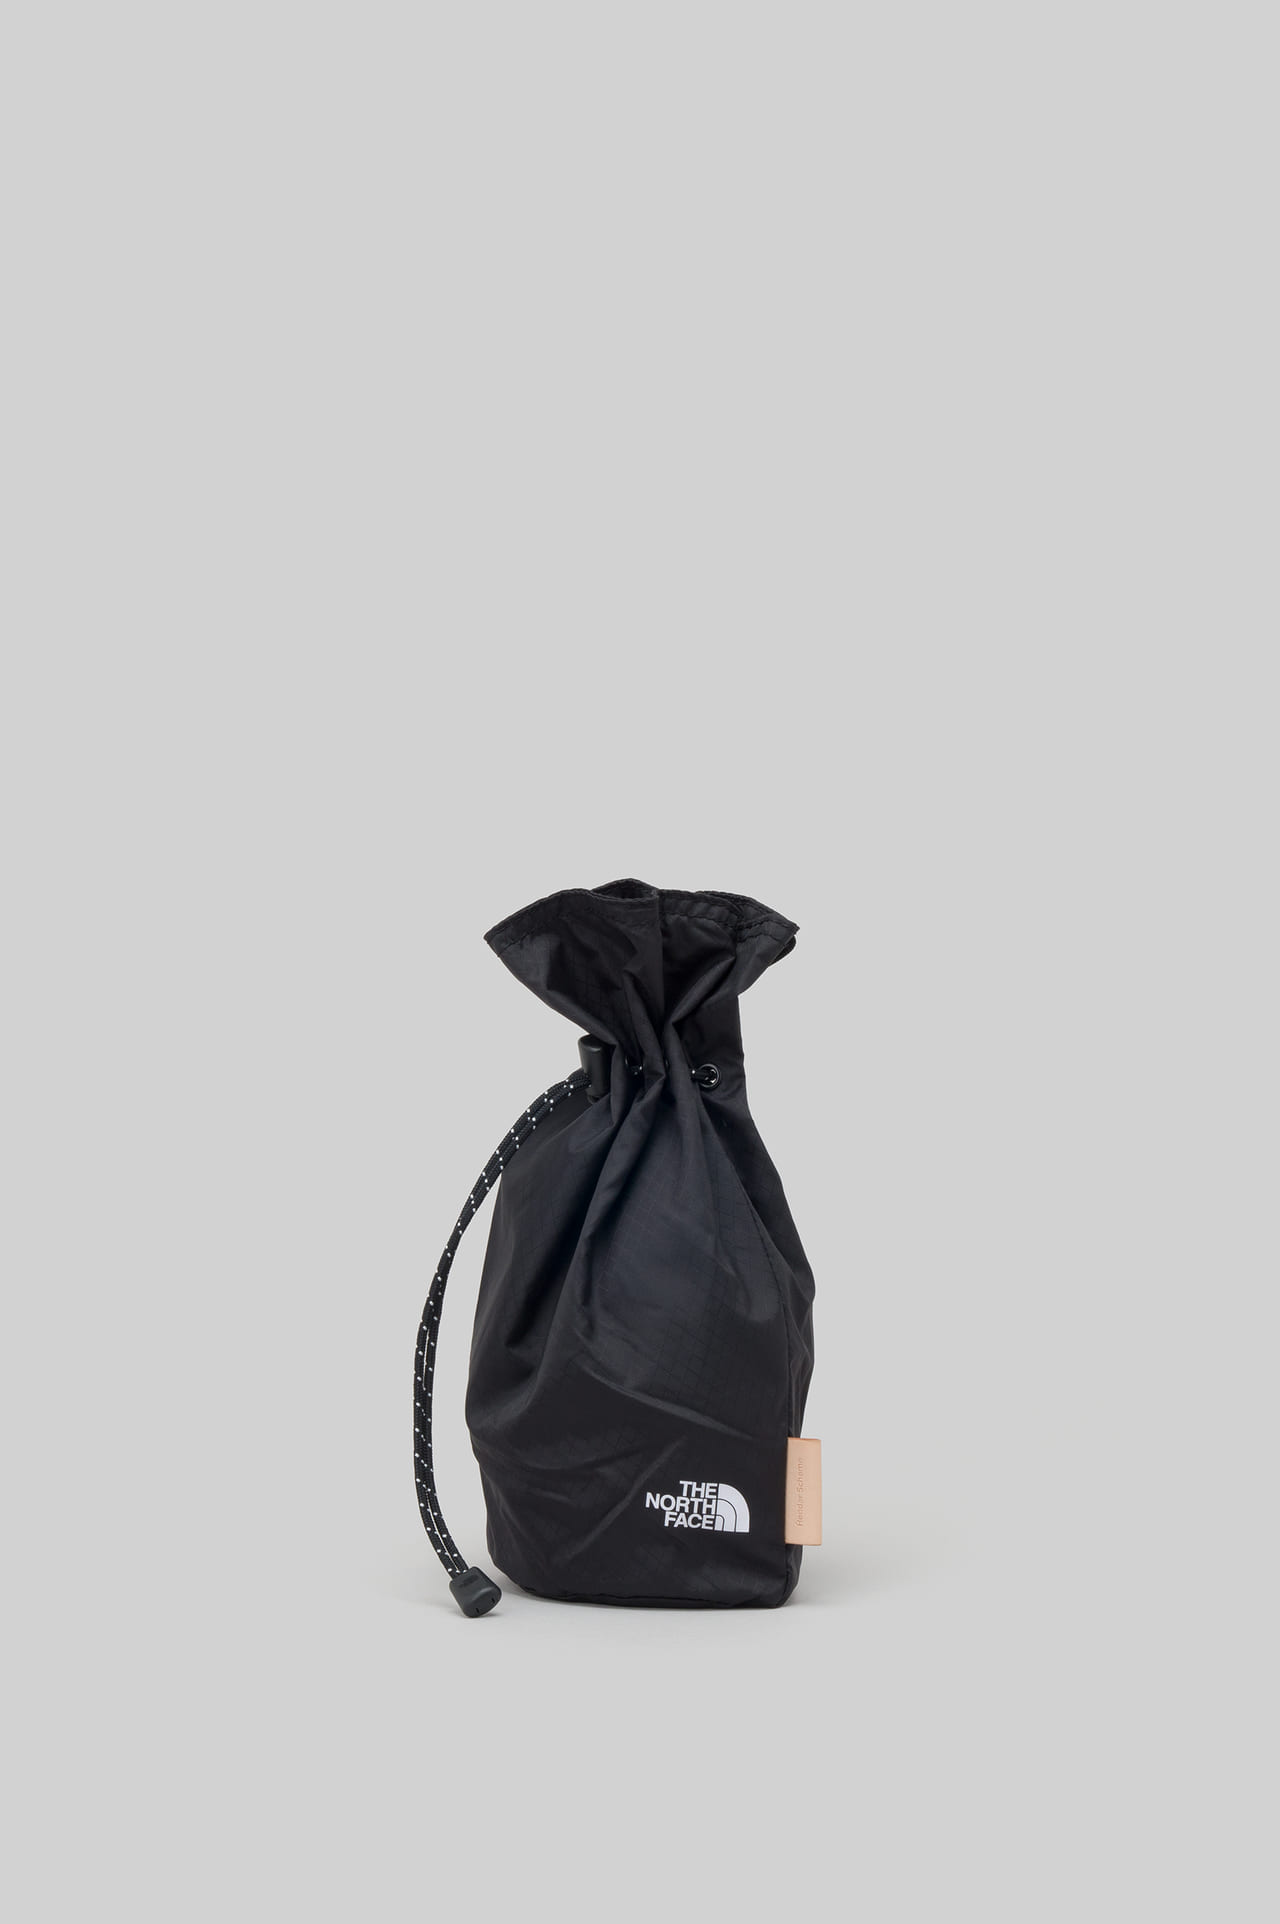 Hender Scheme THE NORTH FACE Pouch Kit - 通販 - gofukuyasan.com